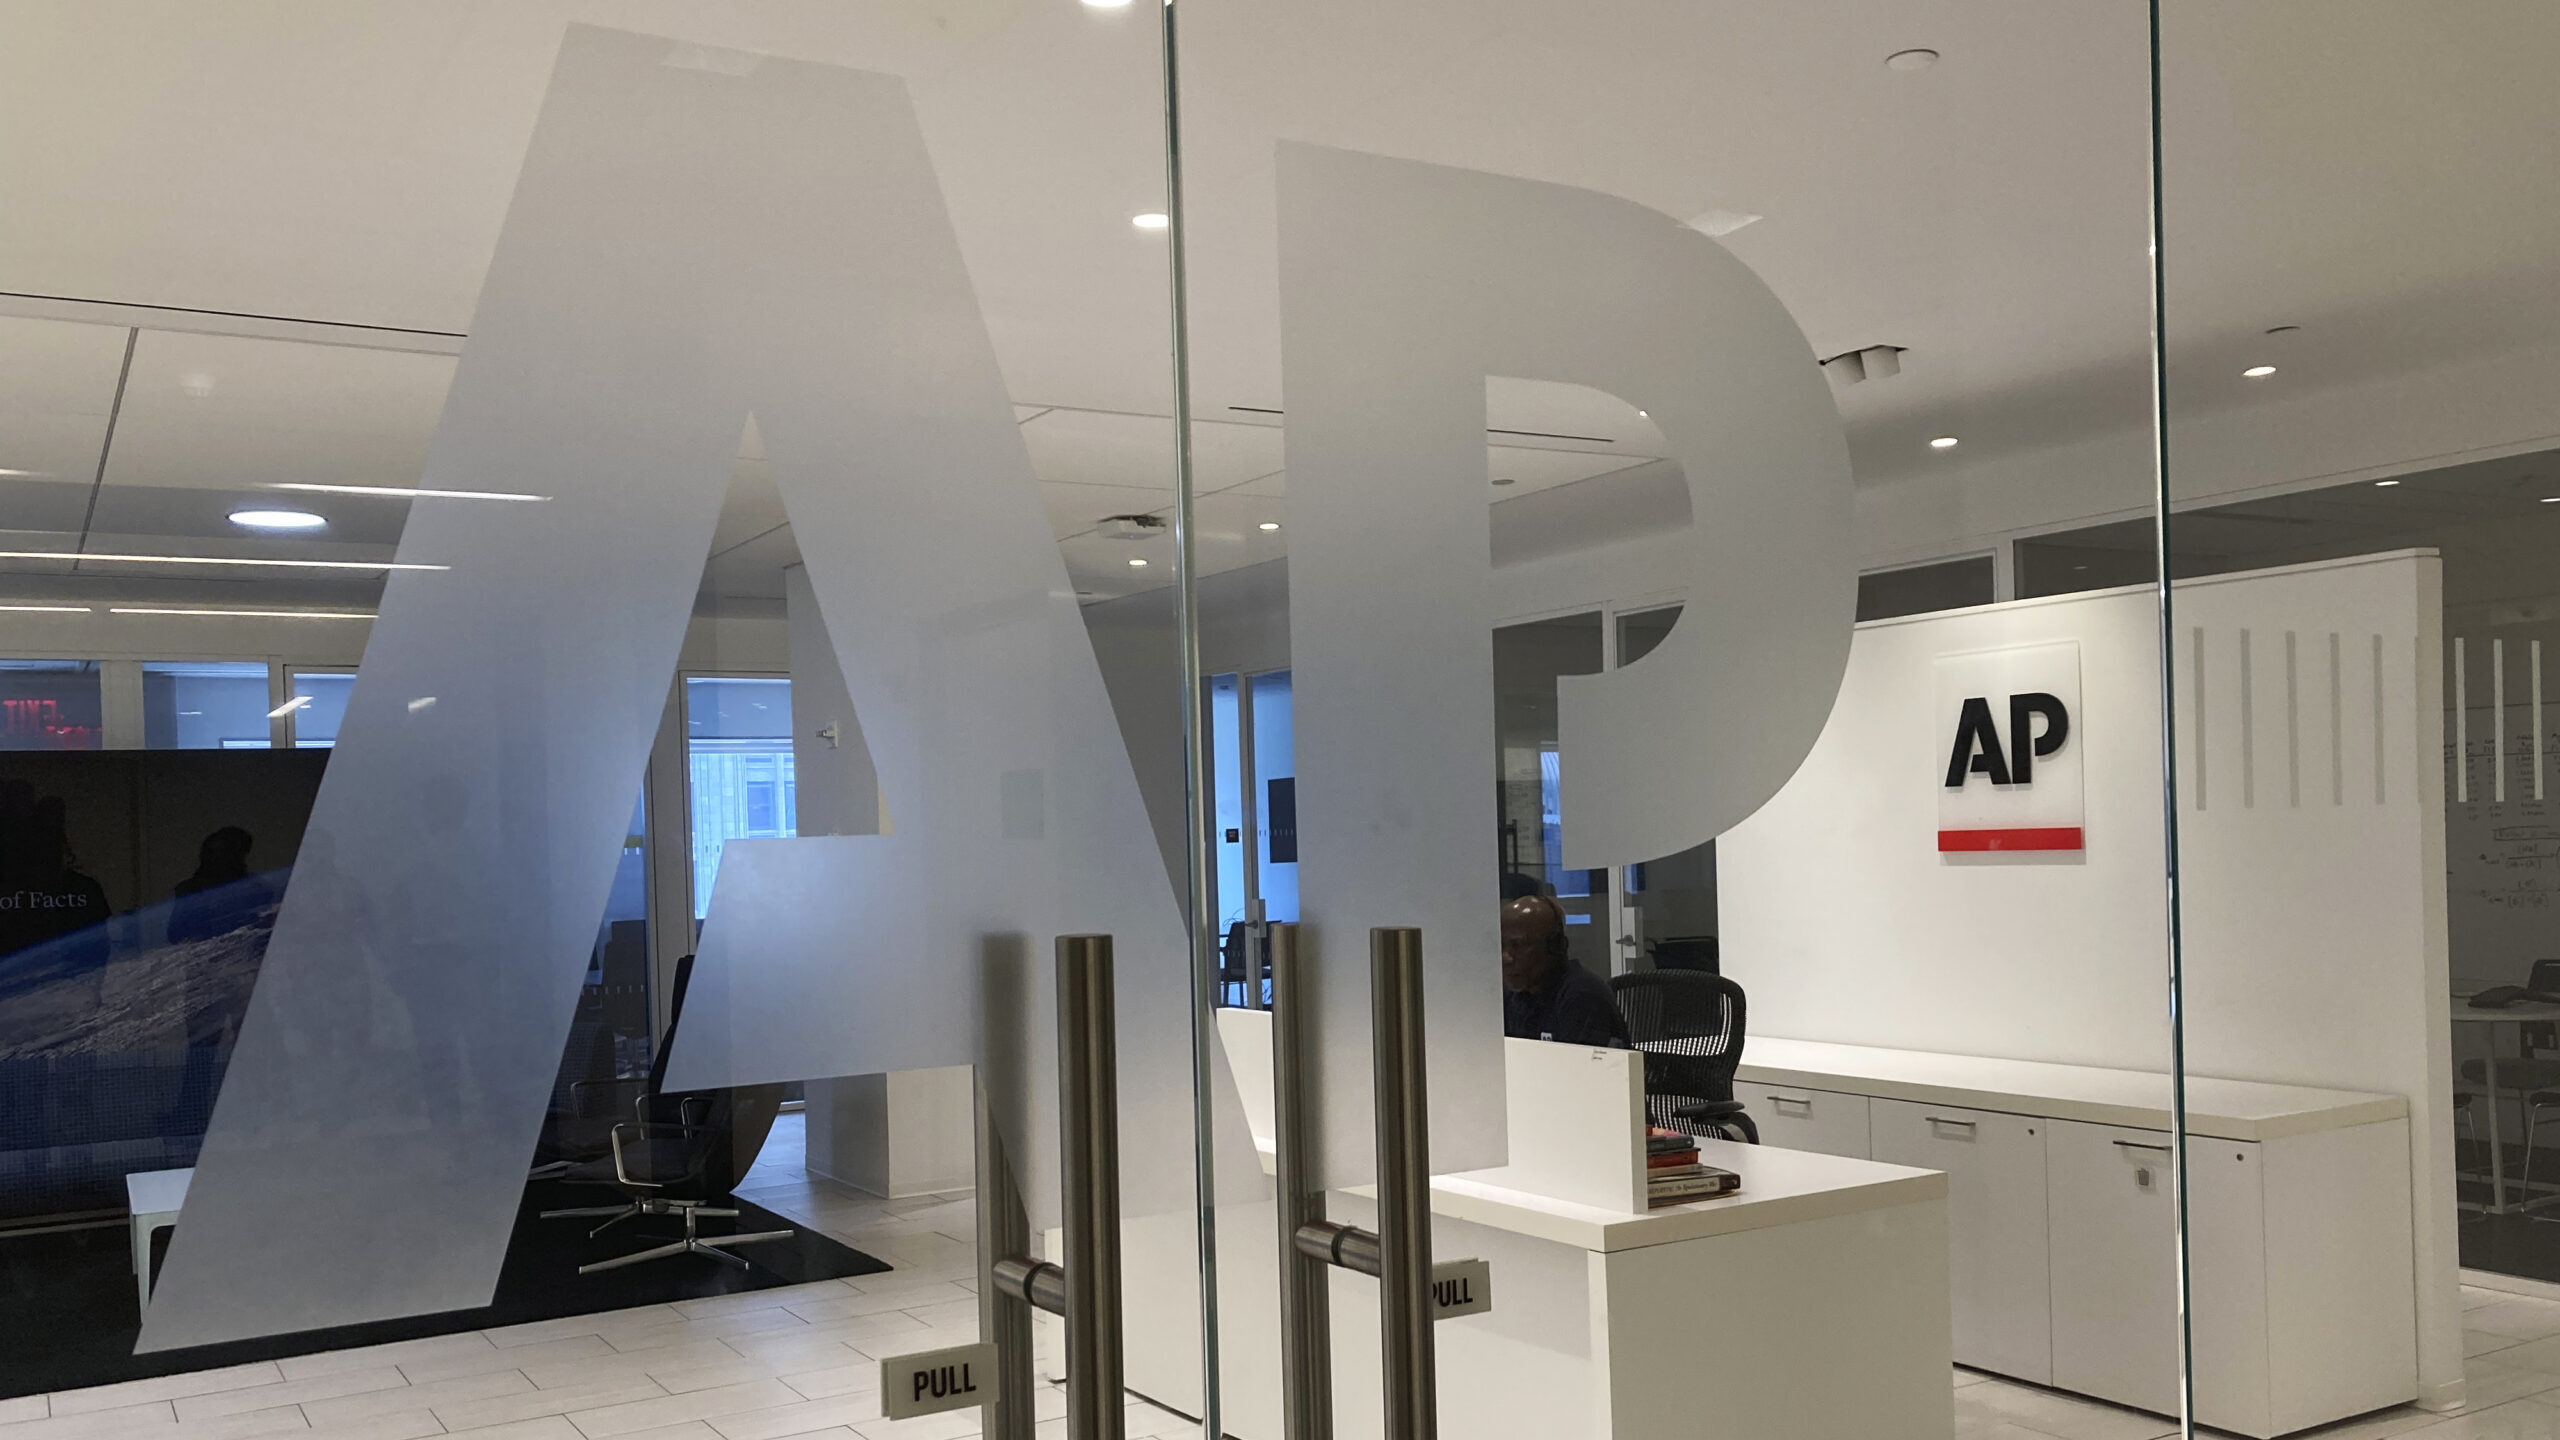 The Associated Press logo is shown at the entrance to the news organization's office in New York. T...